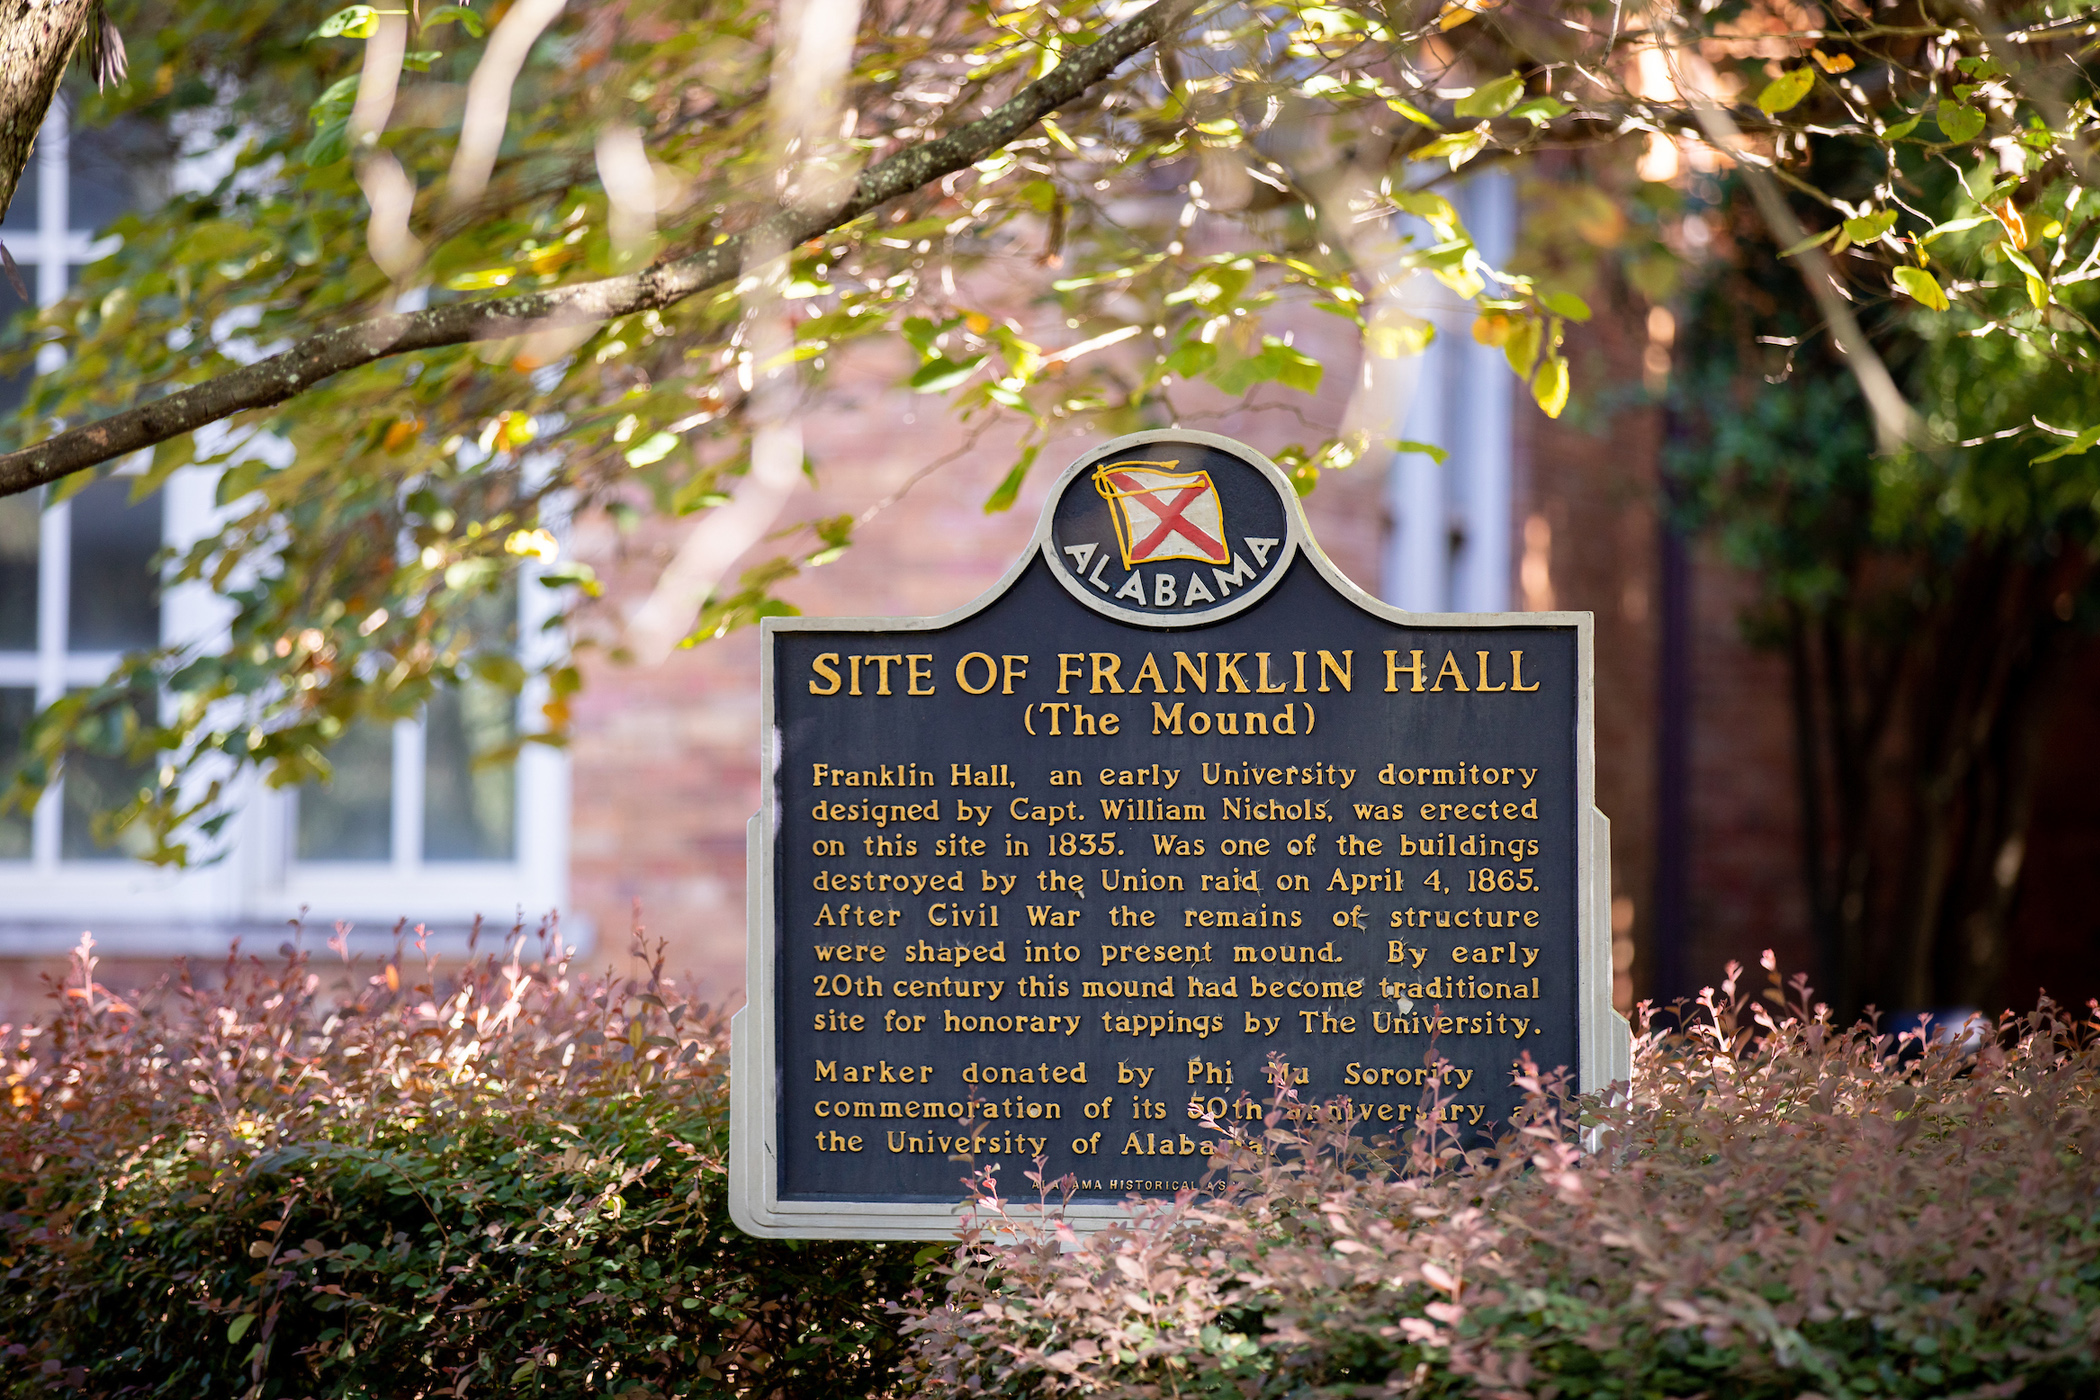 Historical marker for the Mound